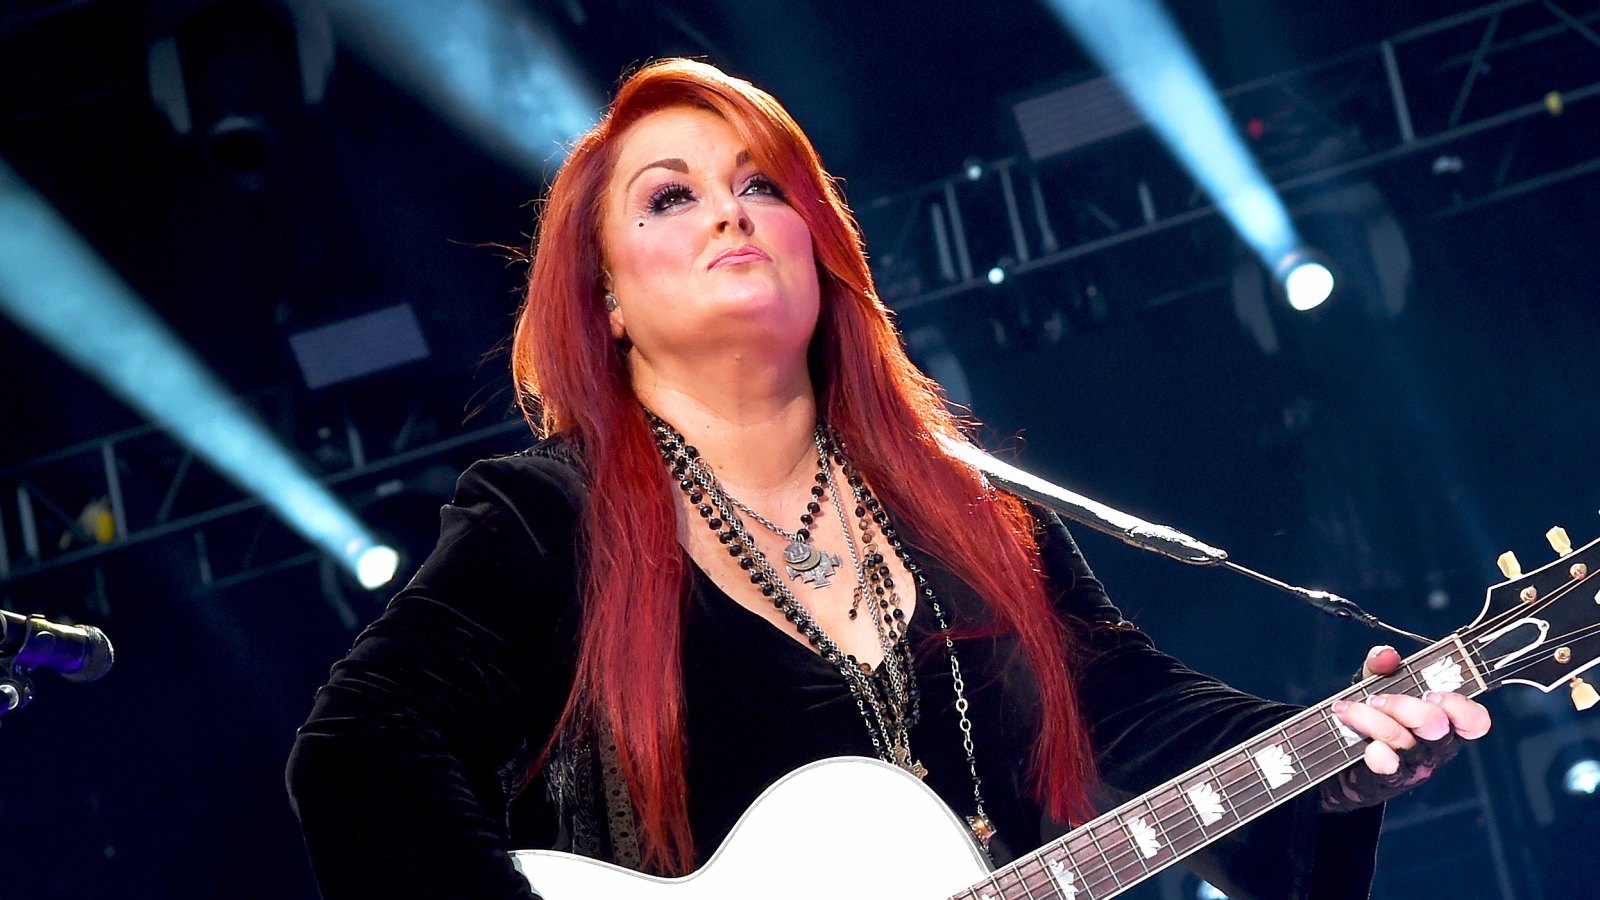 Wynonna Judd performs onstage during the 2015 CMA Festival in Nashville, Tennessee.